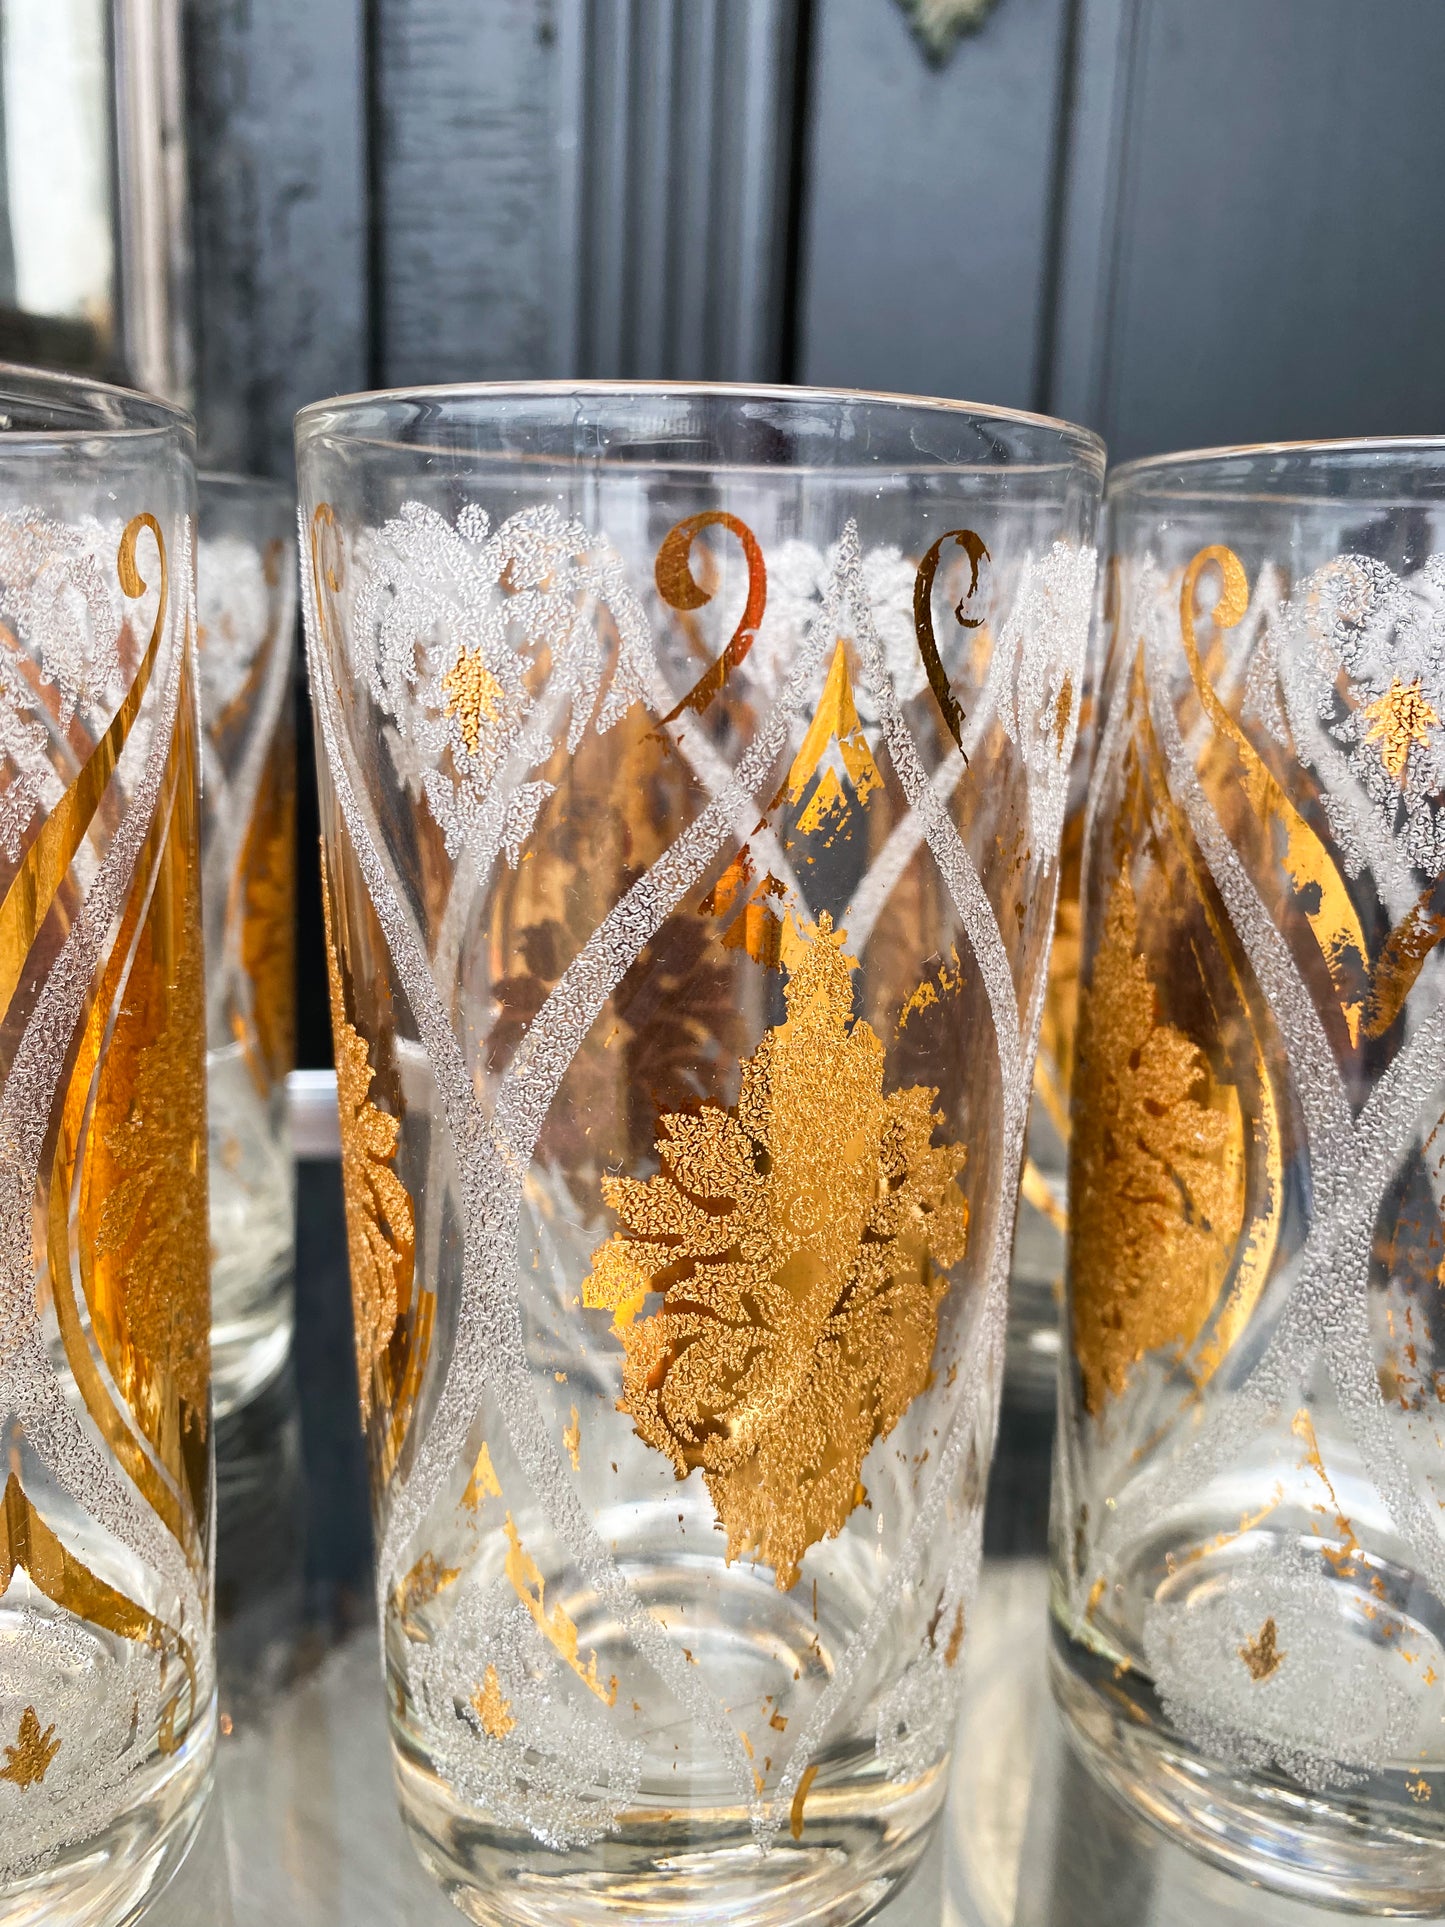 Set of 6 Vintage Gold Paisley Moroccan Highball Cocktail Glasses